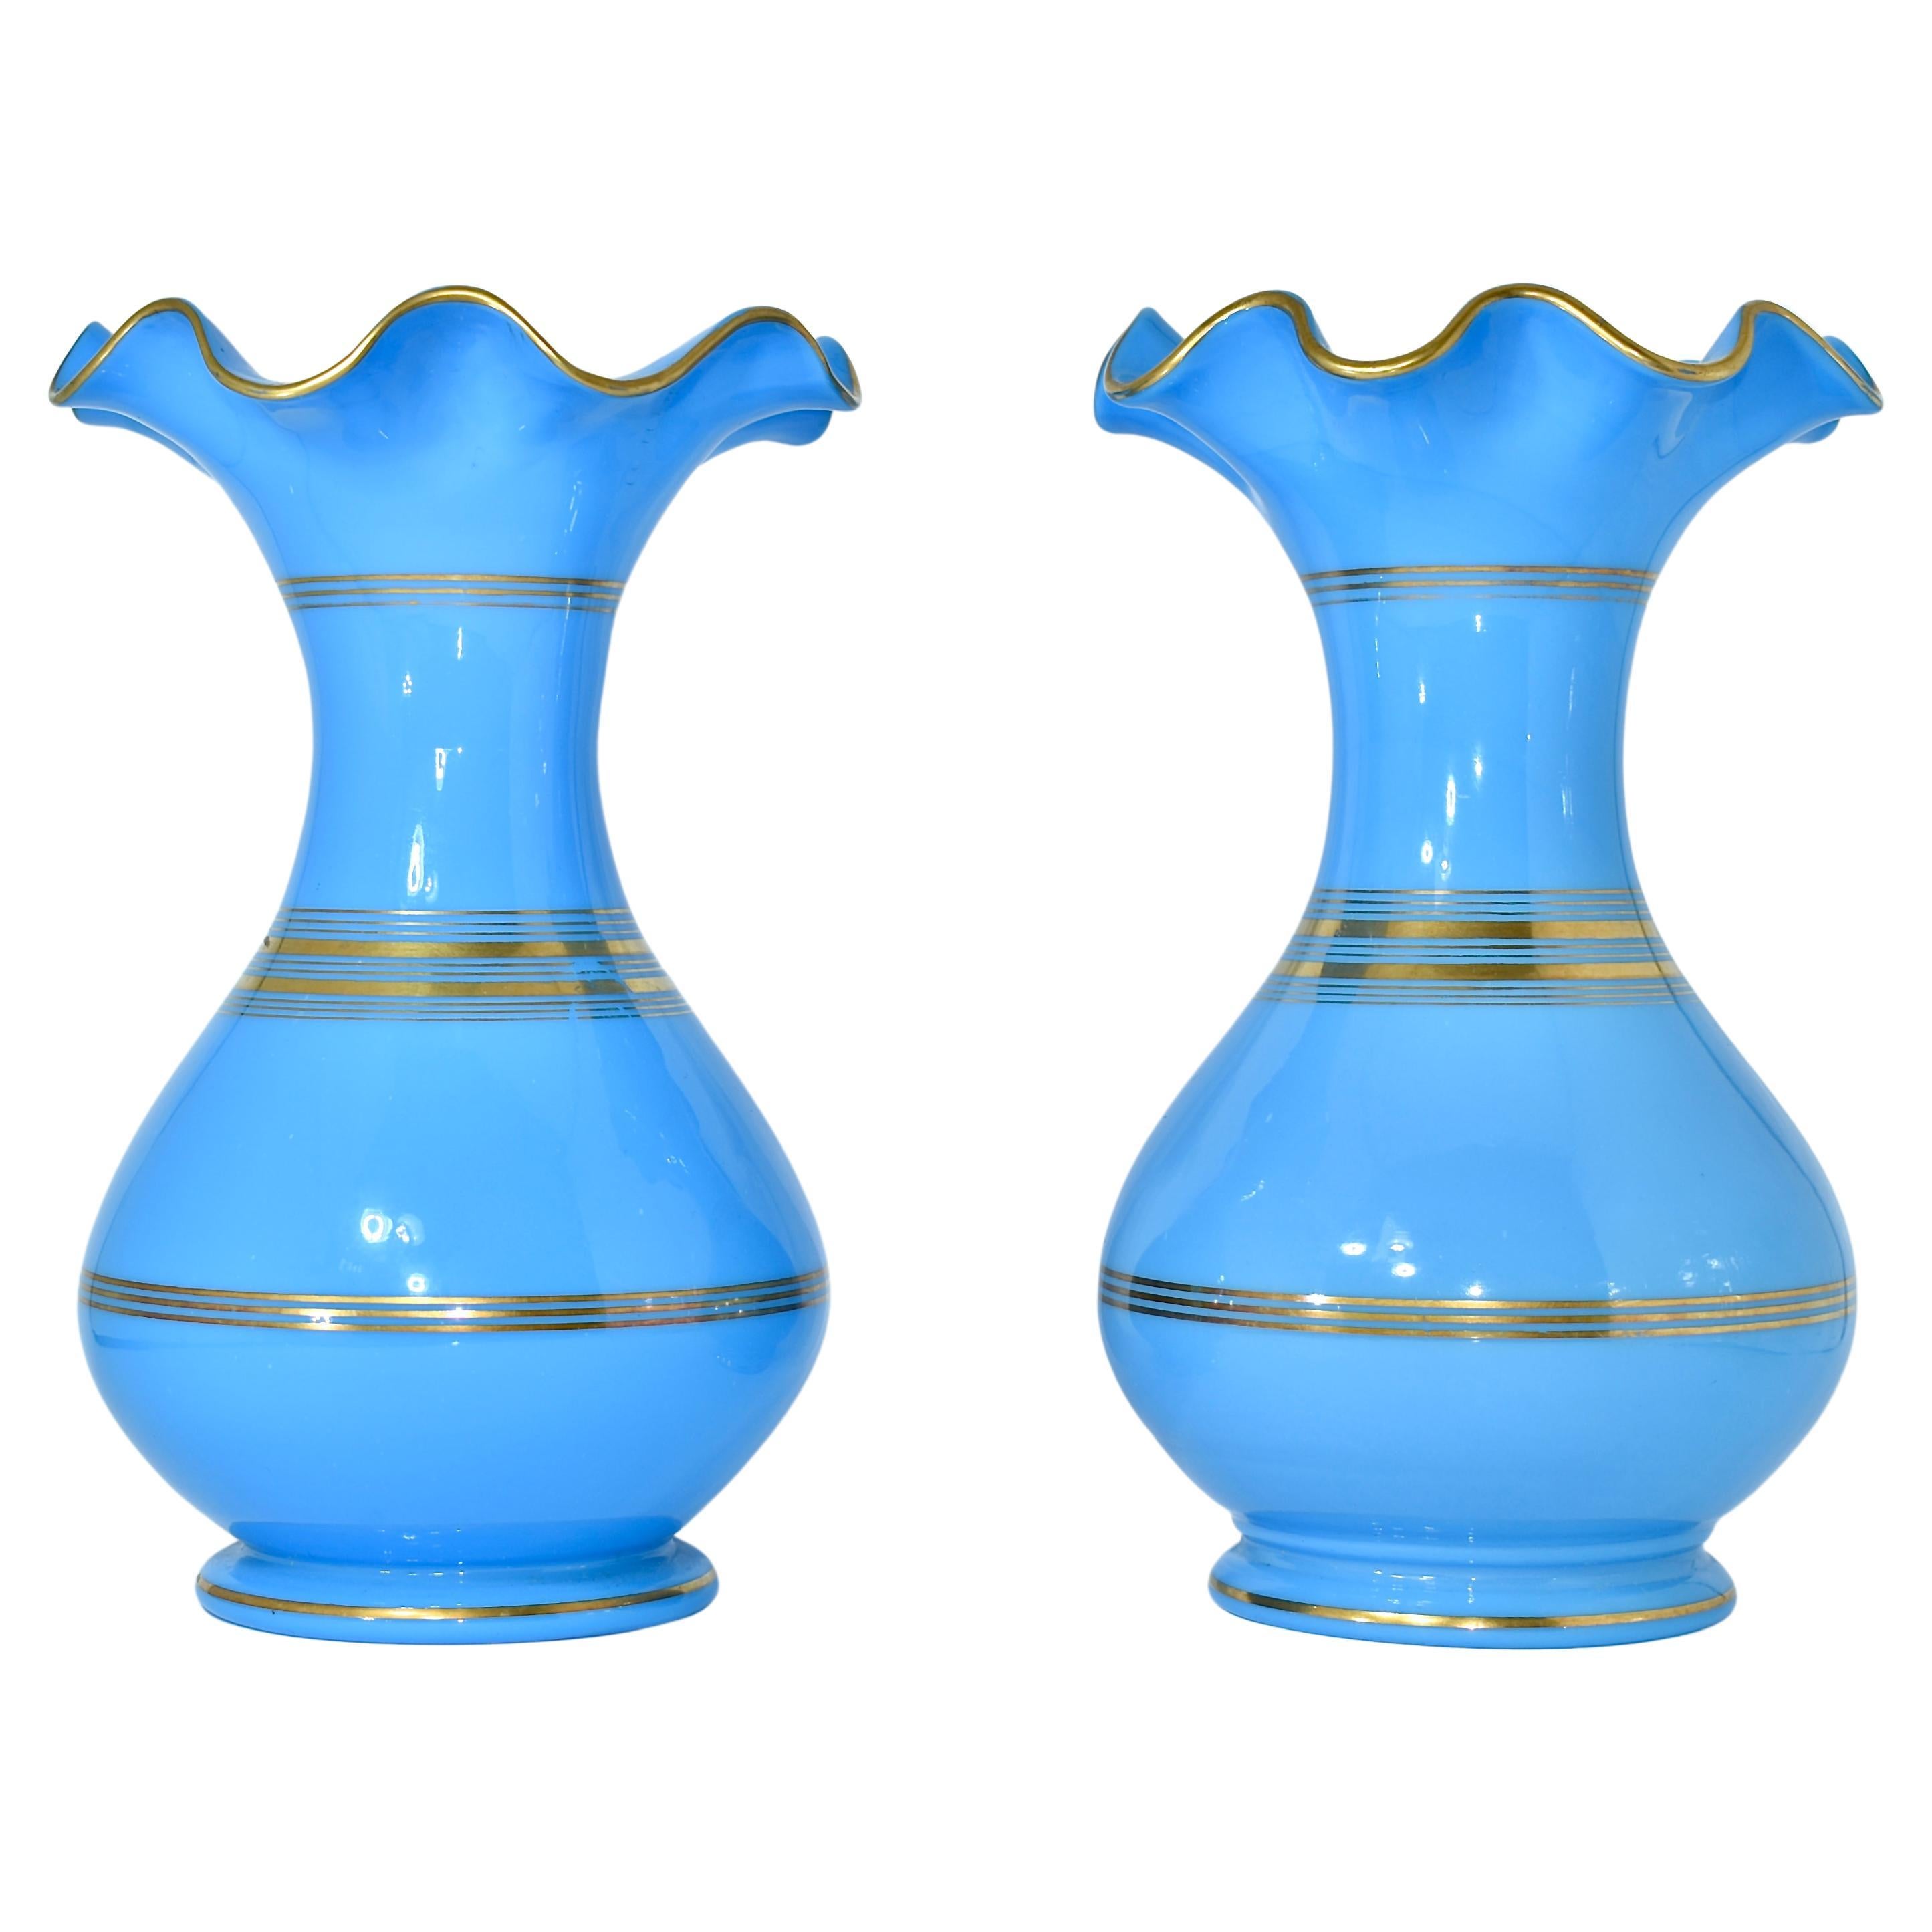 A set of 2 matching opaline glass vases

Beautiful Blue color with gilding highlights decoration and wavy scalloped rims

France, 19th Century

Measures 23 cm high